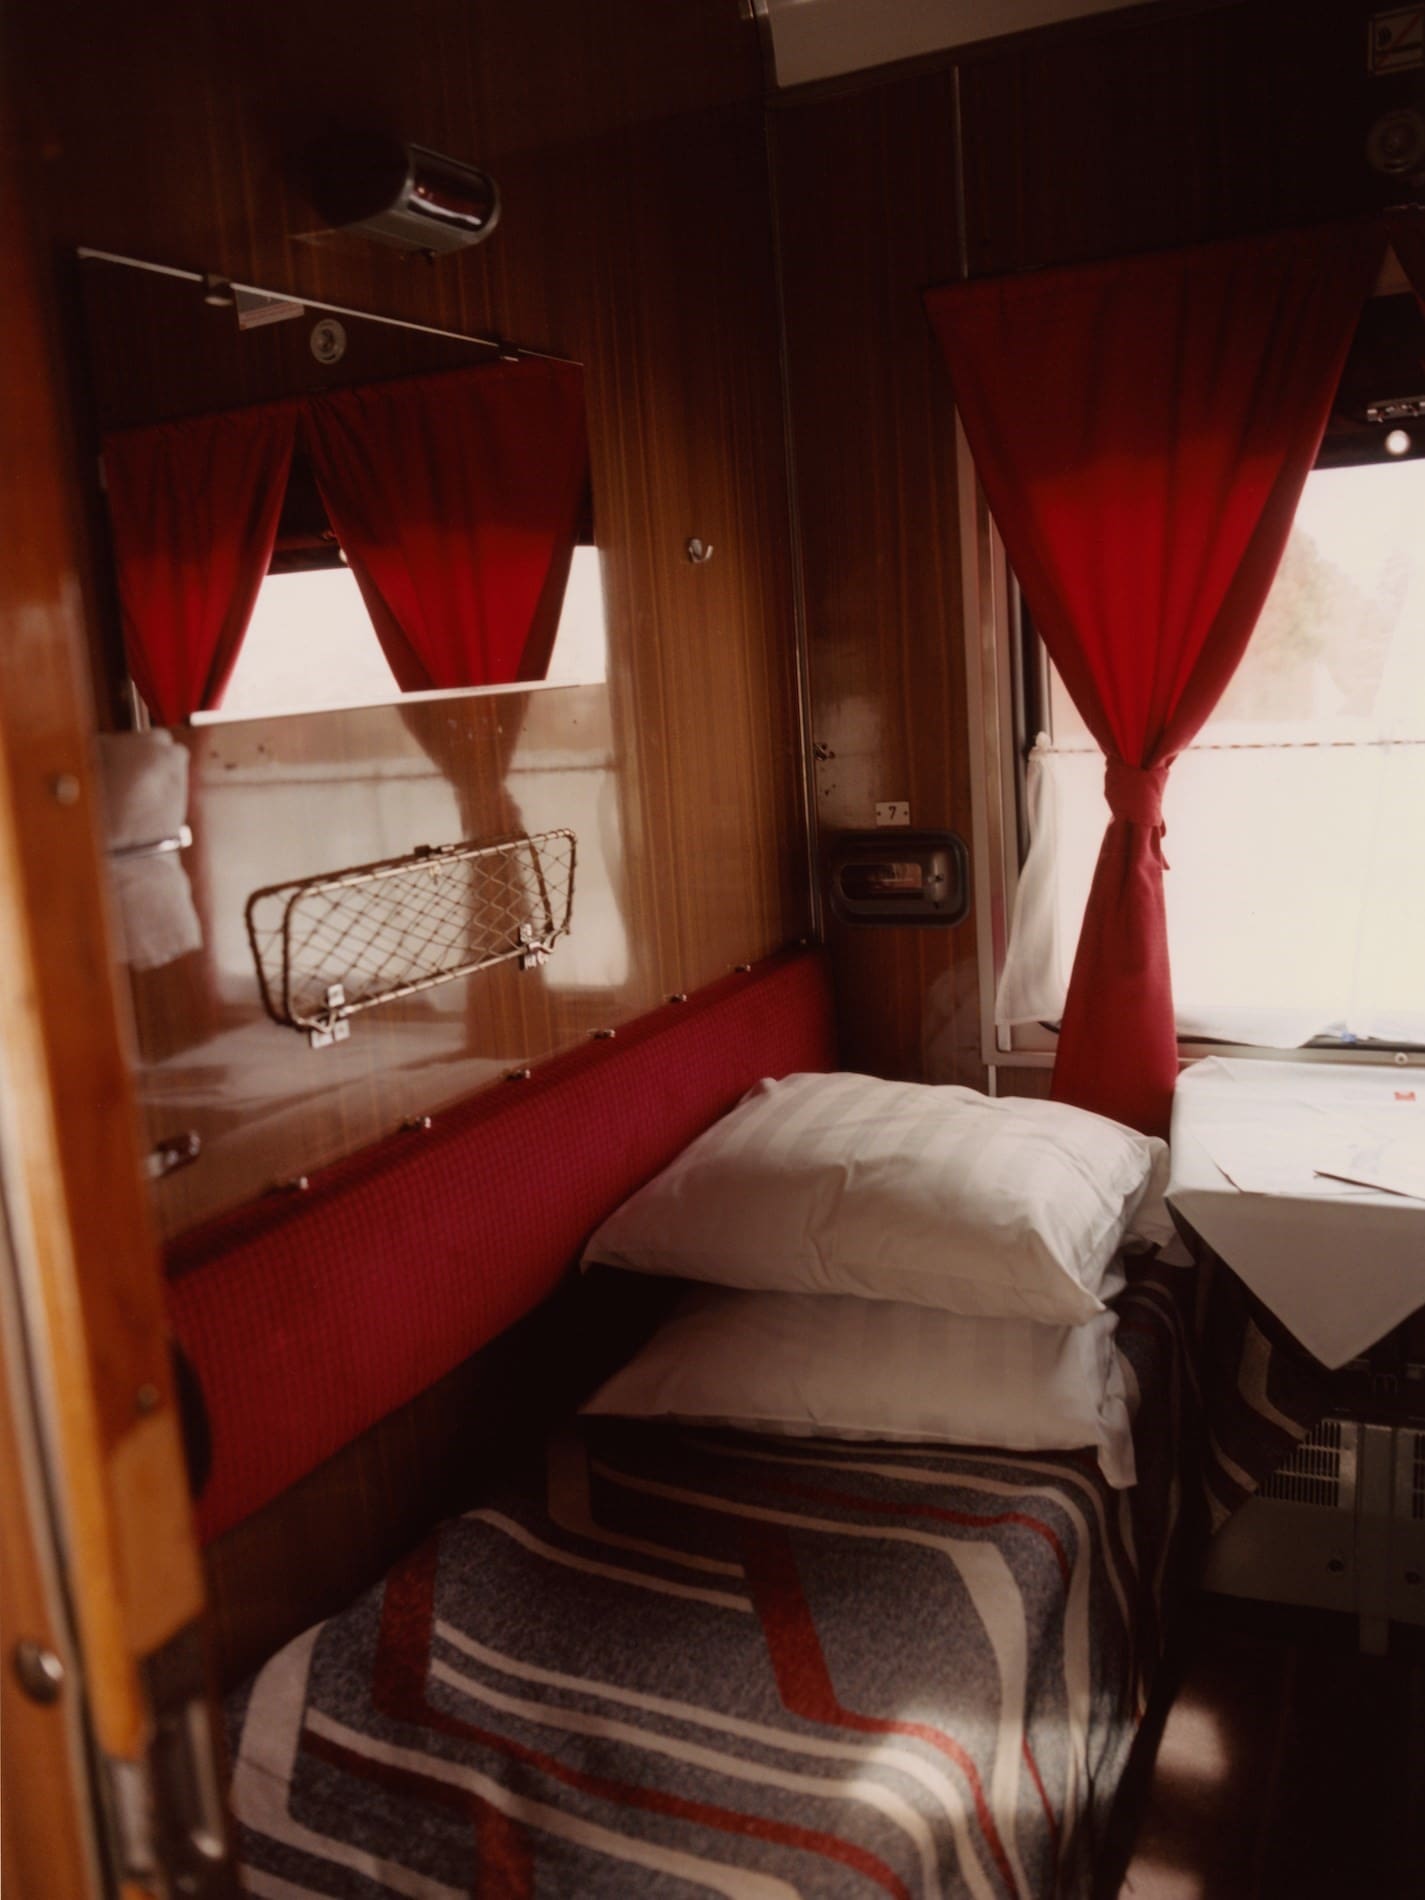 Coco Capitan | A bed inside a train carriage's sleeper compartment, with red curtains, pillows and striped bedding